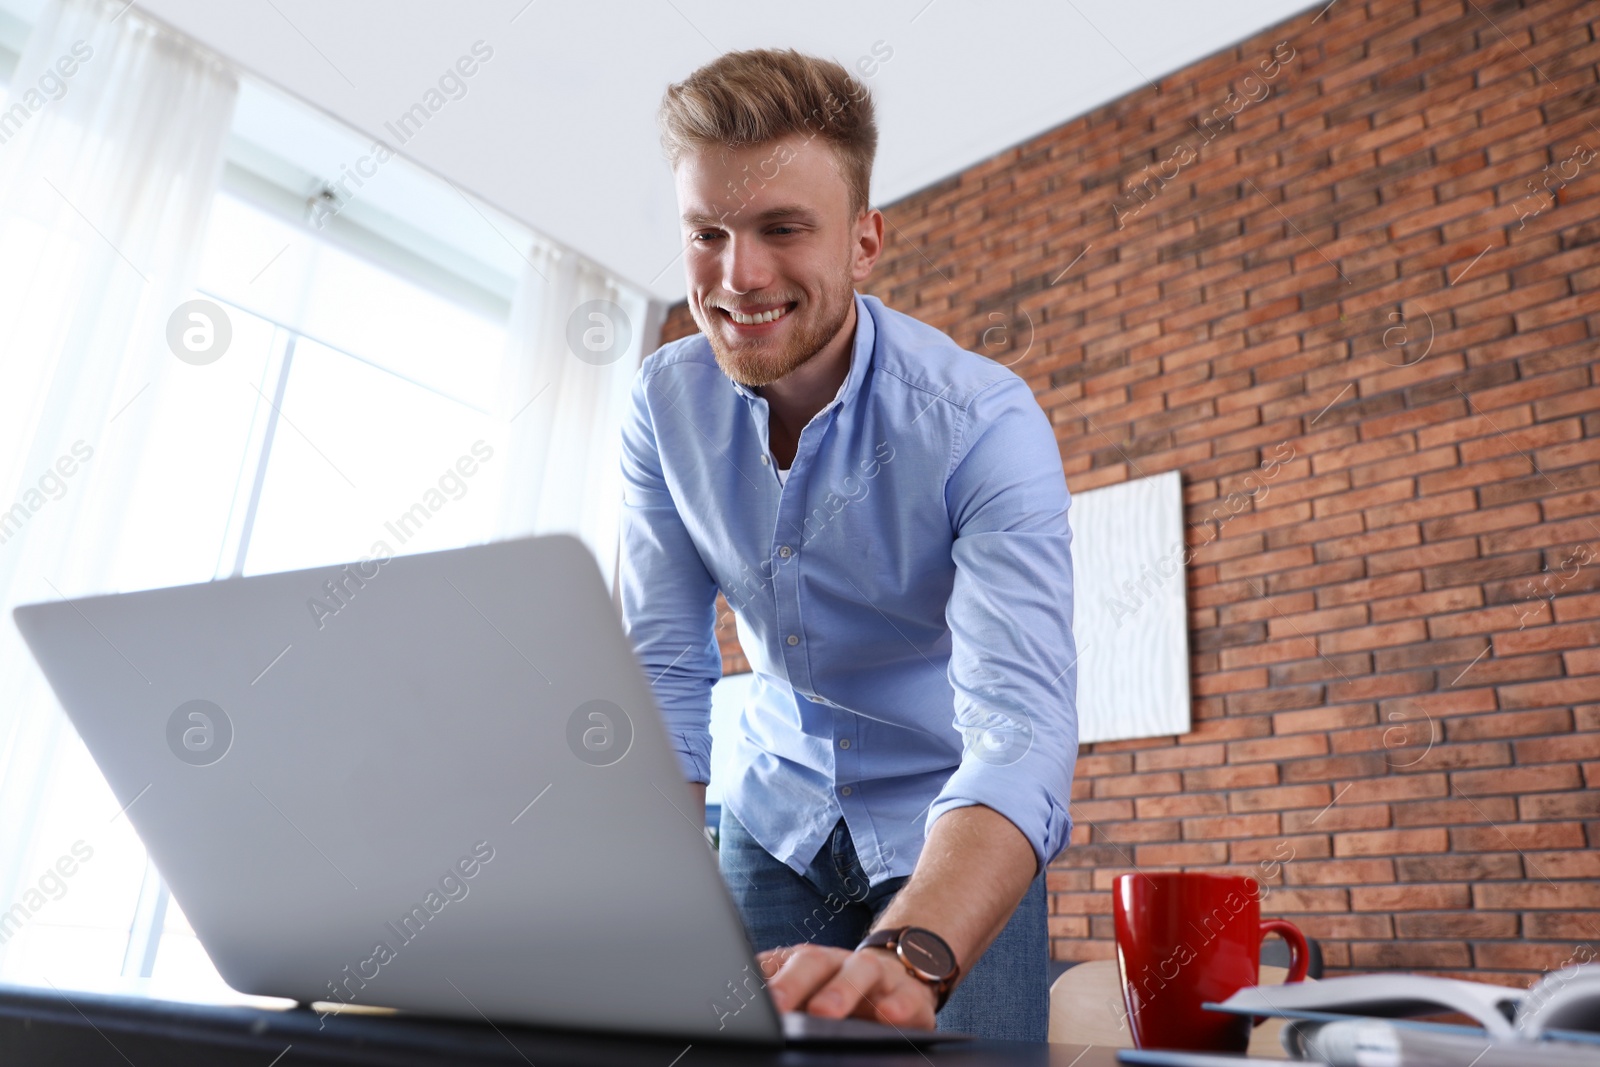 Photo of Young man using laptop at table indoors